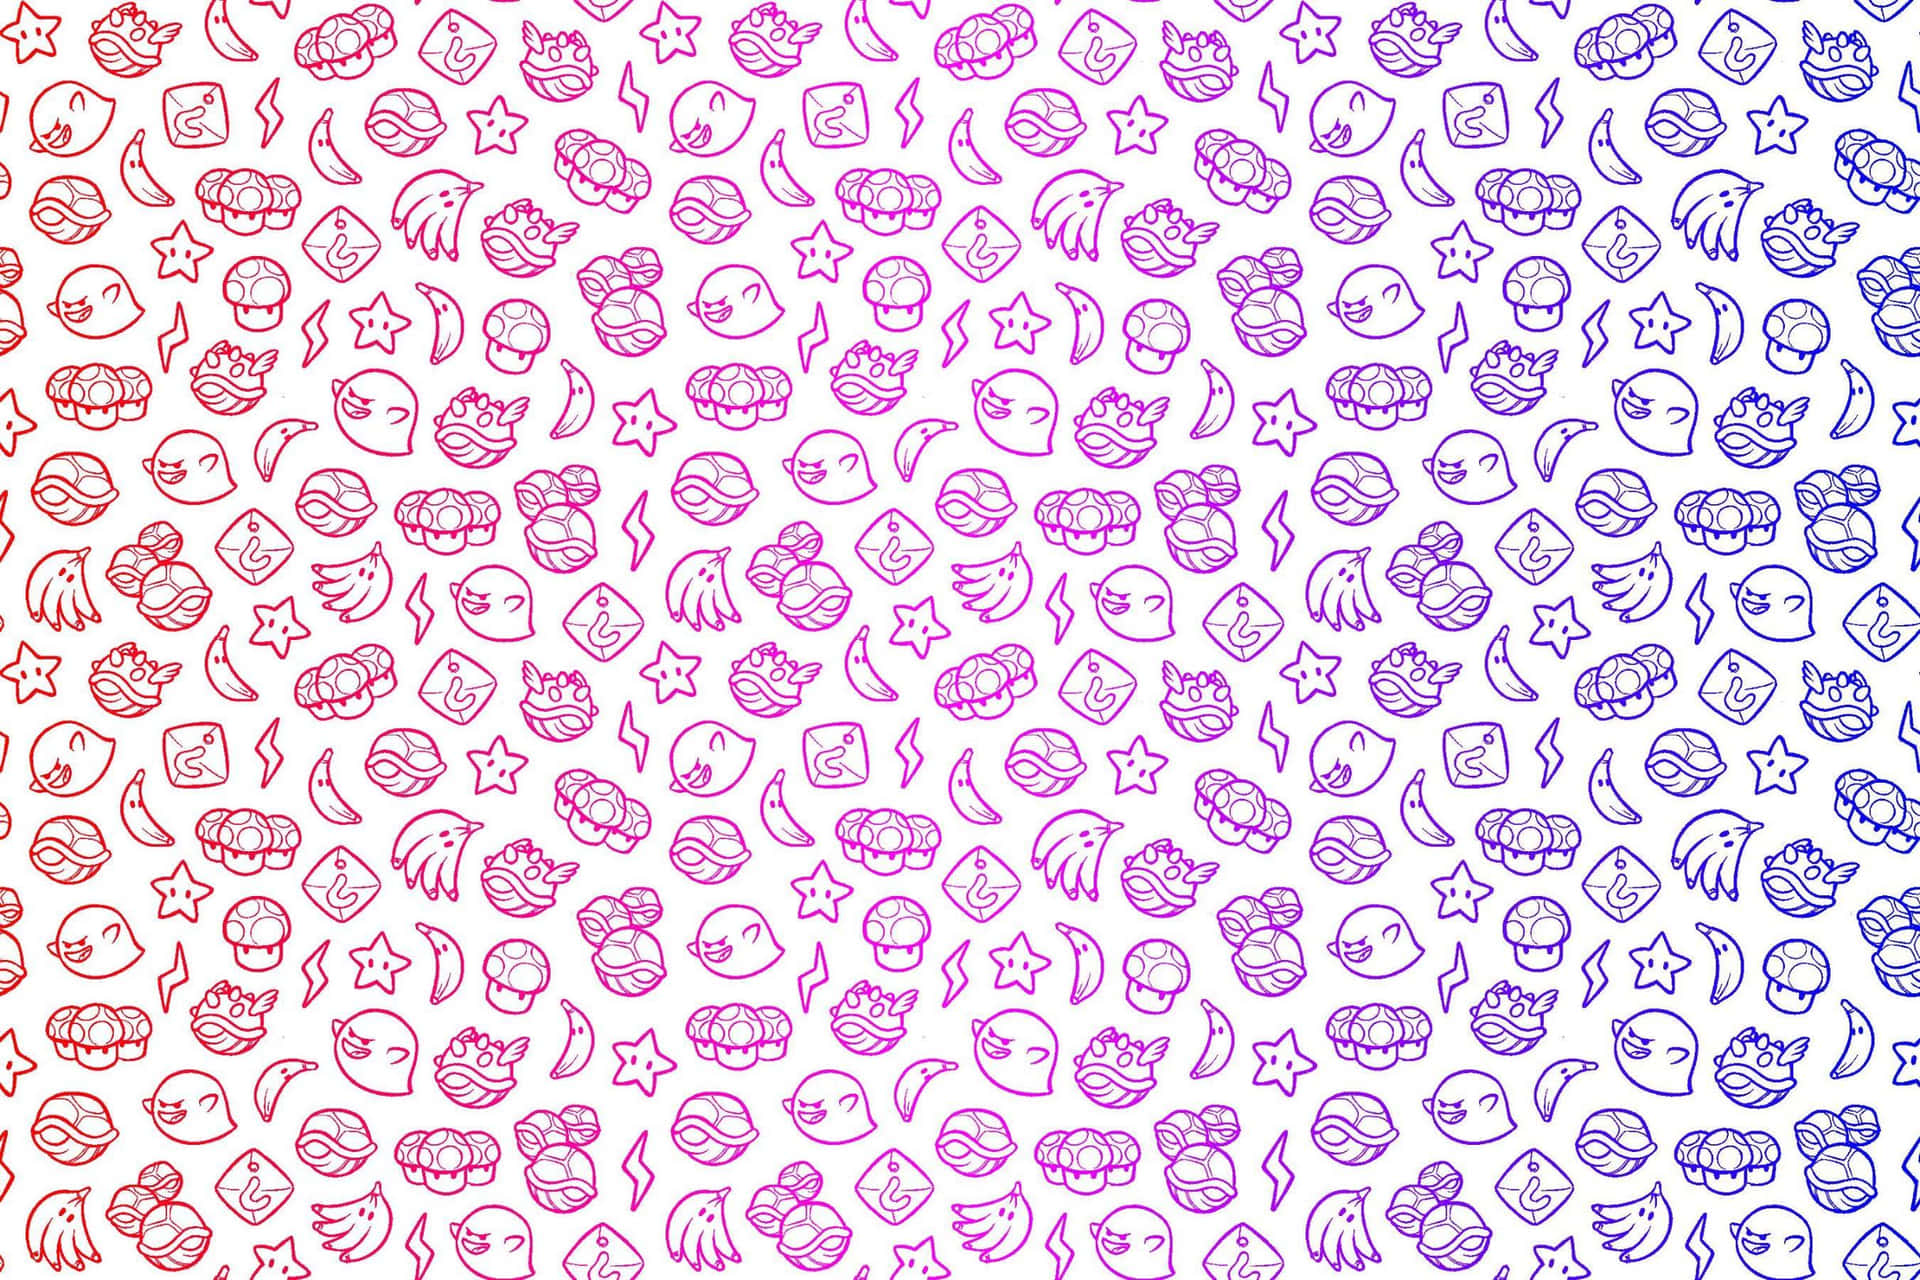 Enhance the look of your phone with this vibrant tumblr pattern wallpaper. Wallpaper